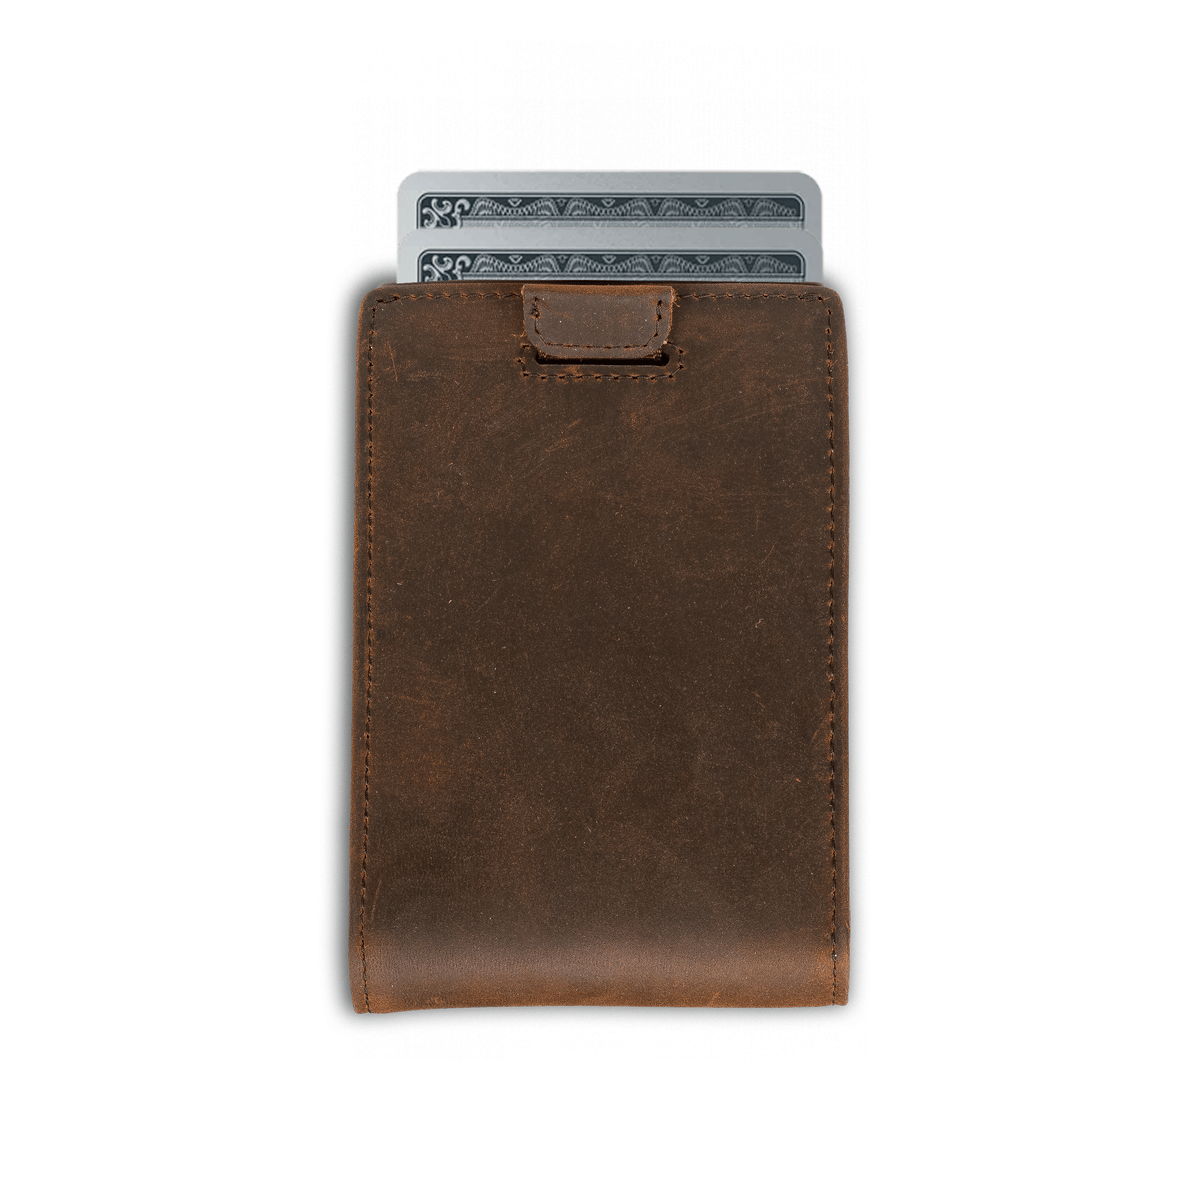 How do I tighten up card holder slots on leather wallet? : r/howto